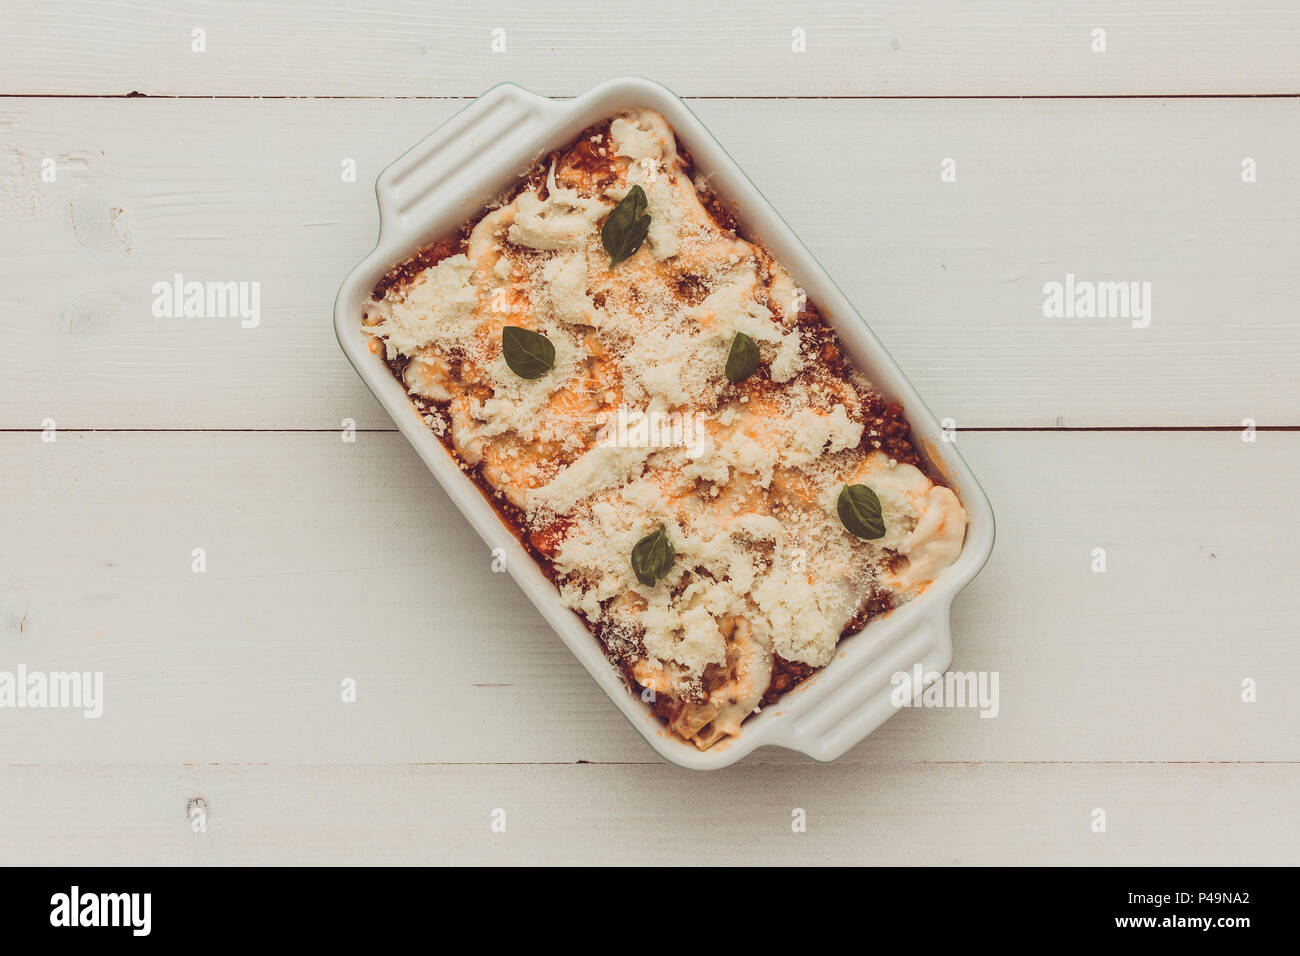 Lasagna Bolognese with Beef, Bolognese Sauce and Basil Ready for Baking Stock Photo